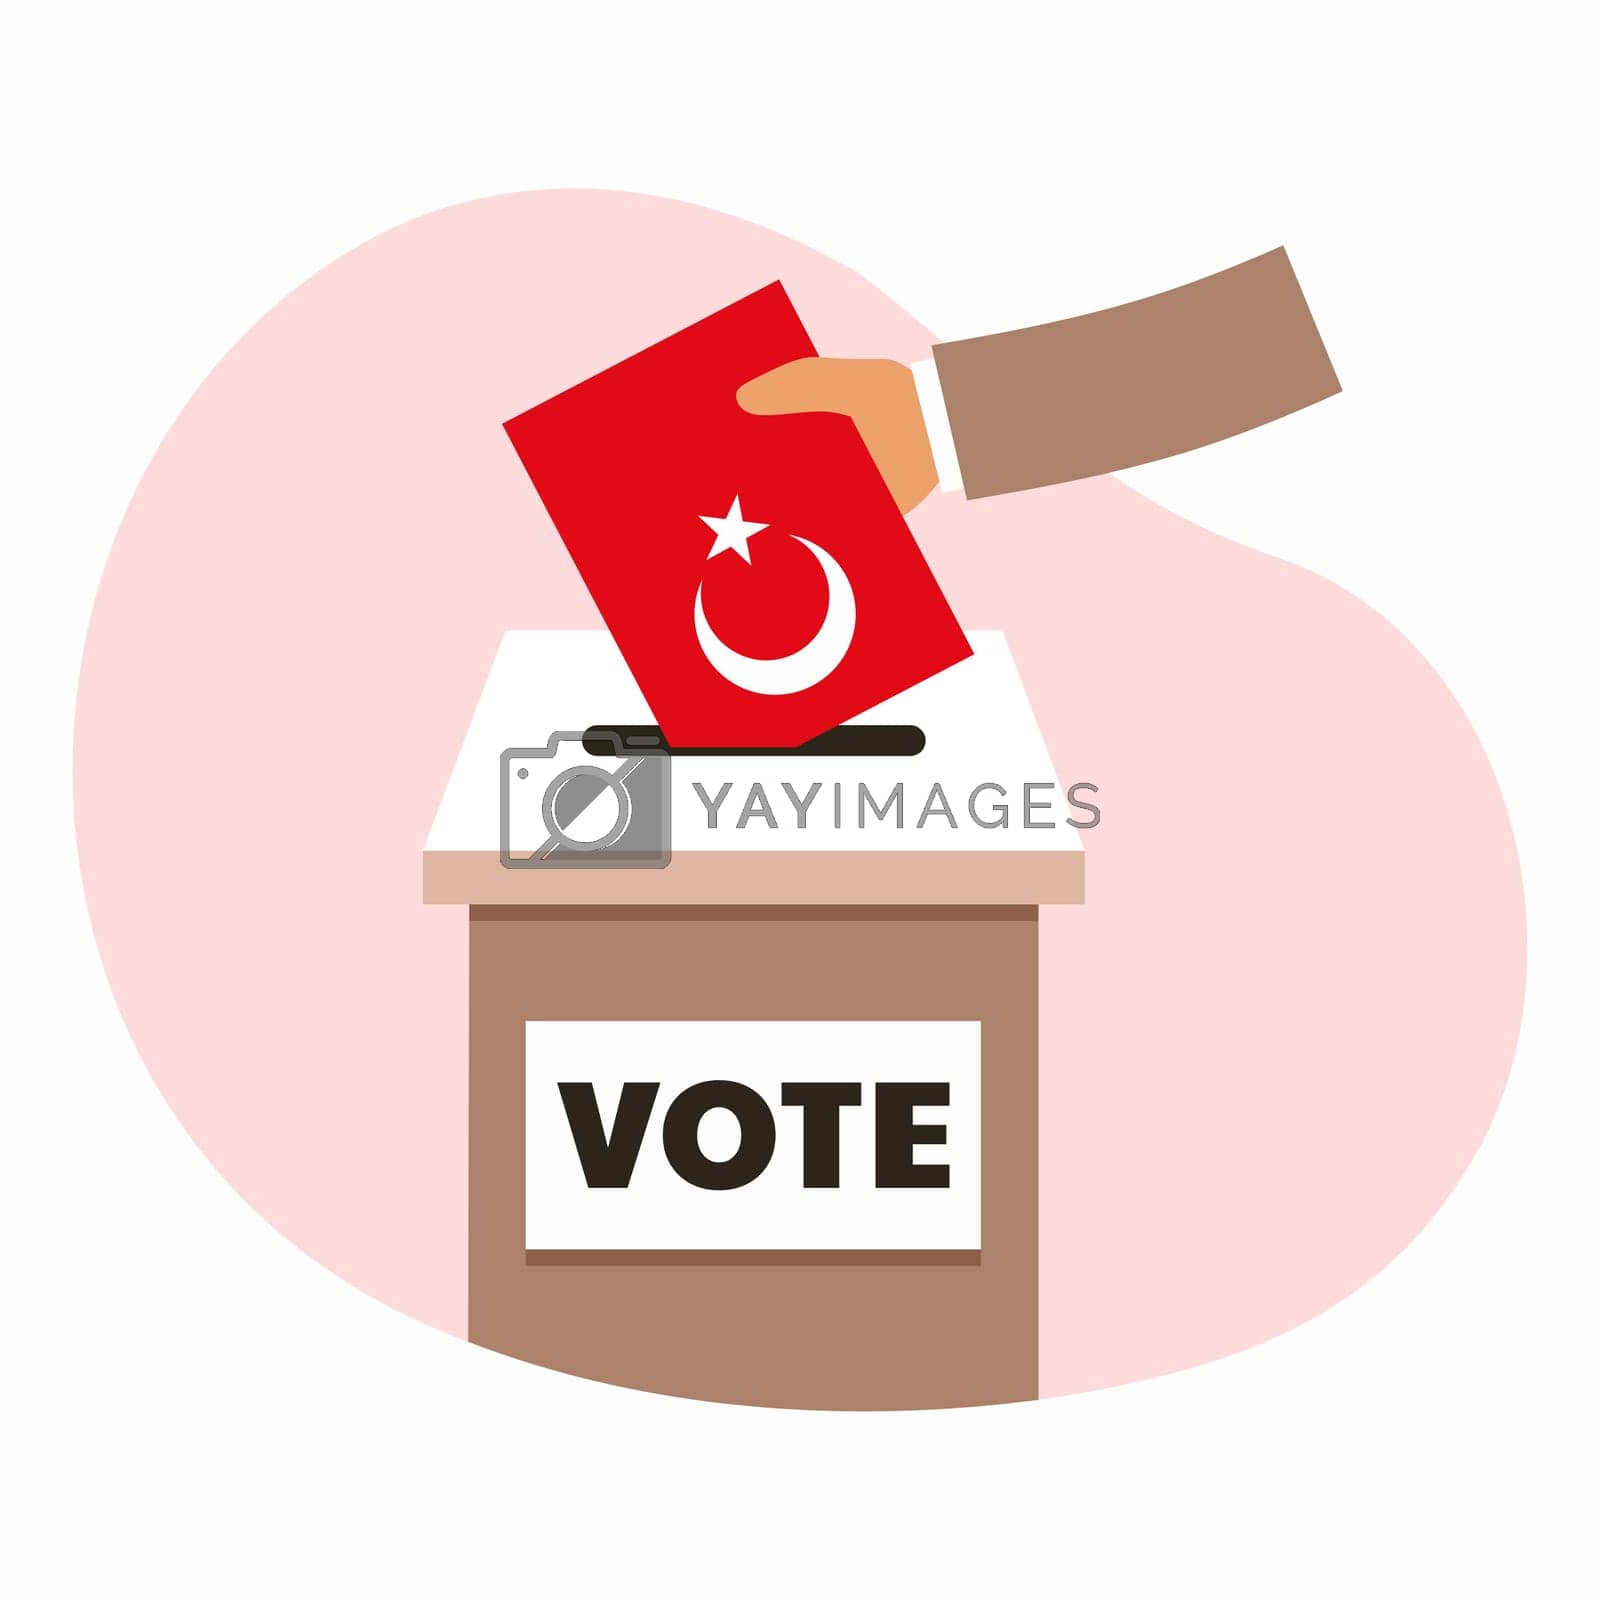 Royalty free image of Turkish presidential elections in 2023. Voting. Turkey flag. Hand drops ballot into box. by polinka_art